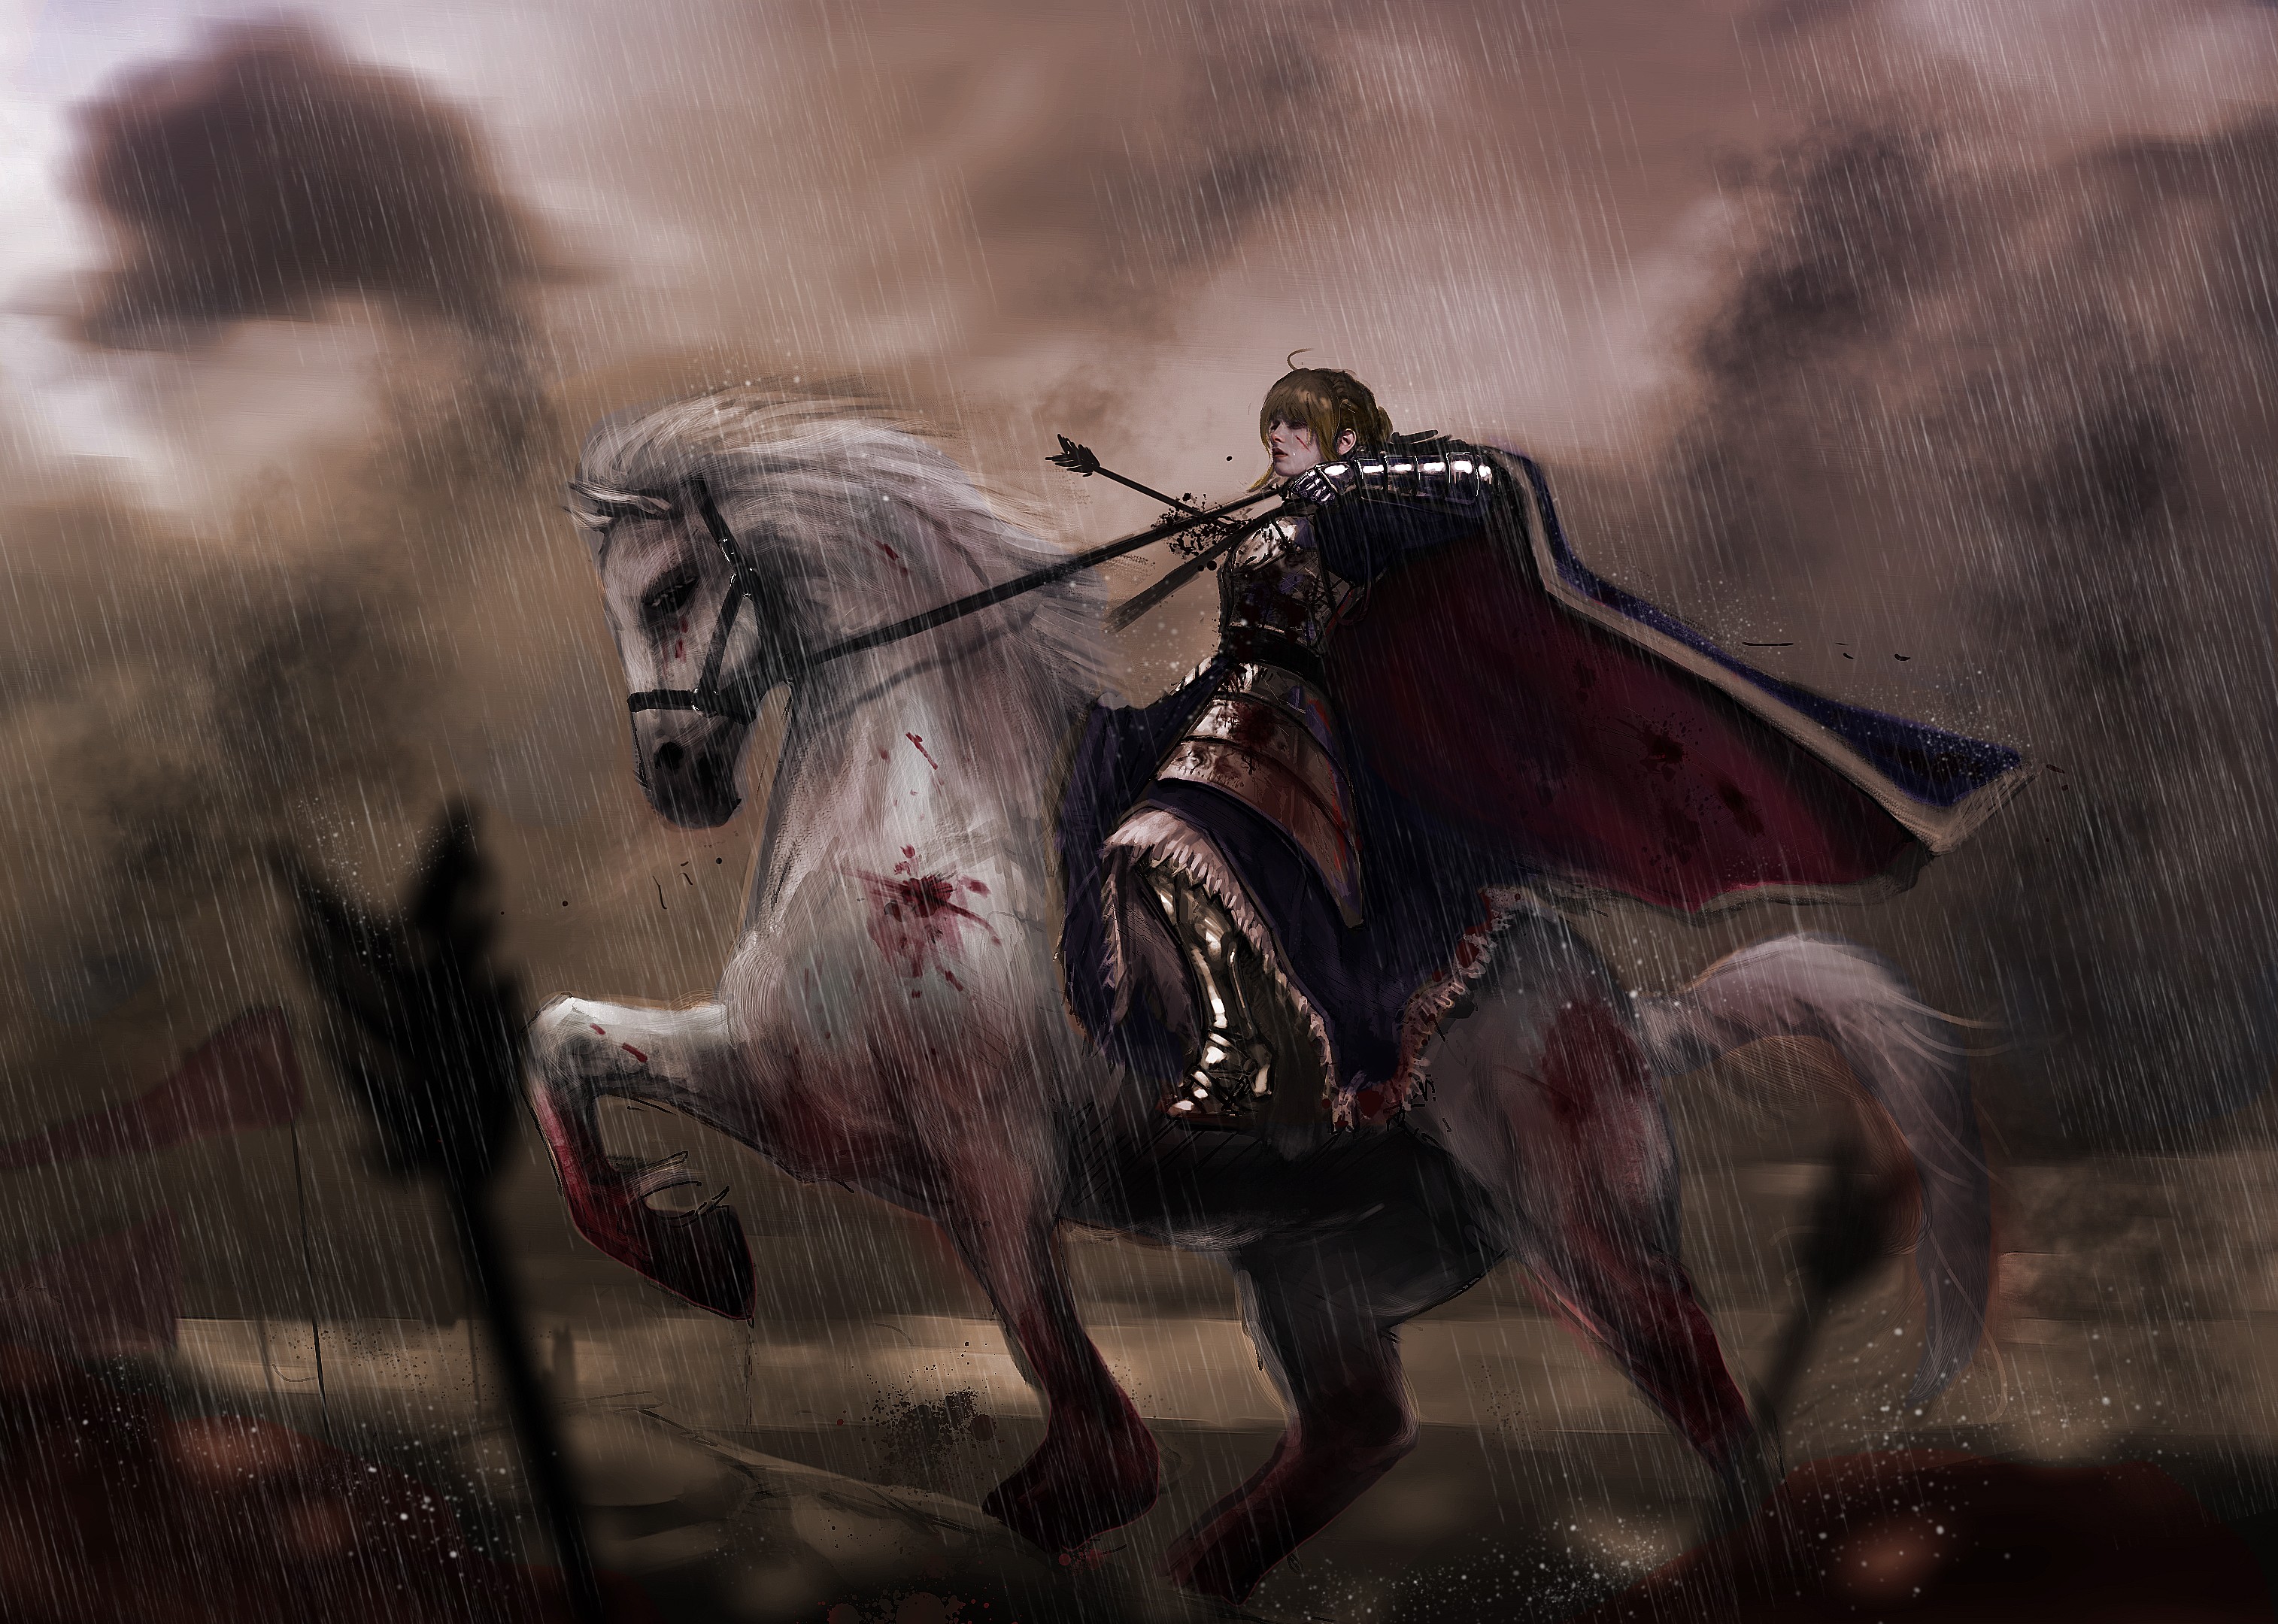 Anime 3029x2160 Fate/Stay Night anime girls Saber Fate/Zero Fate series female warrior armored woman 2D horse riding arrows injured blood stains blood spatter ahoge bangs blue dress rain anime clouds cape gauntlets Artoria Pendragon fan art